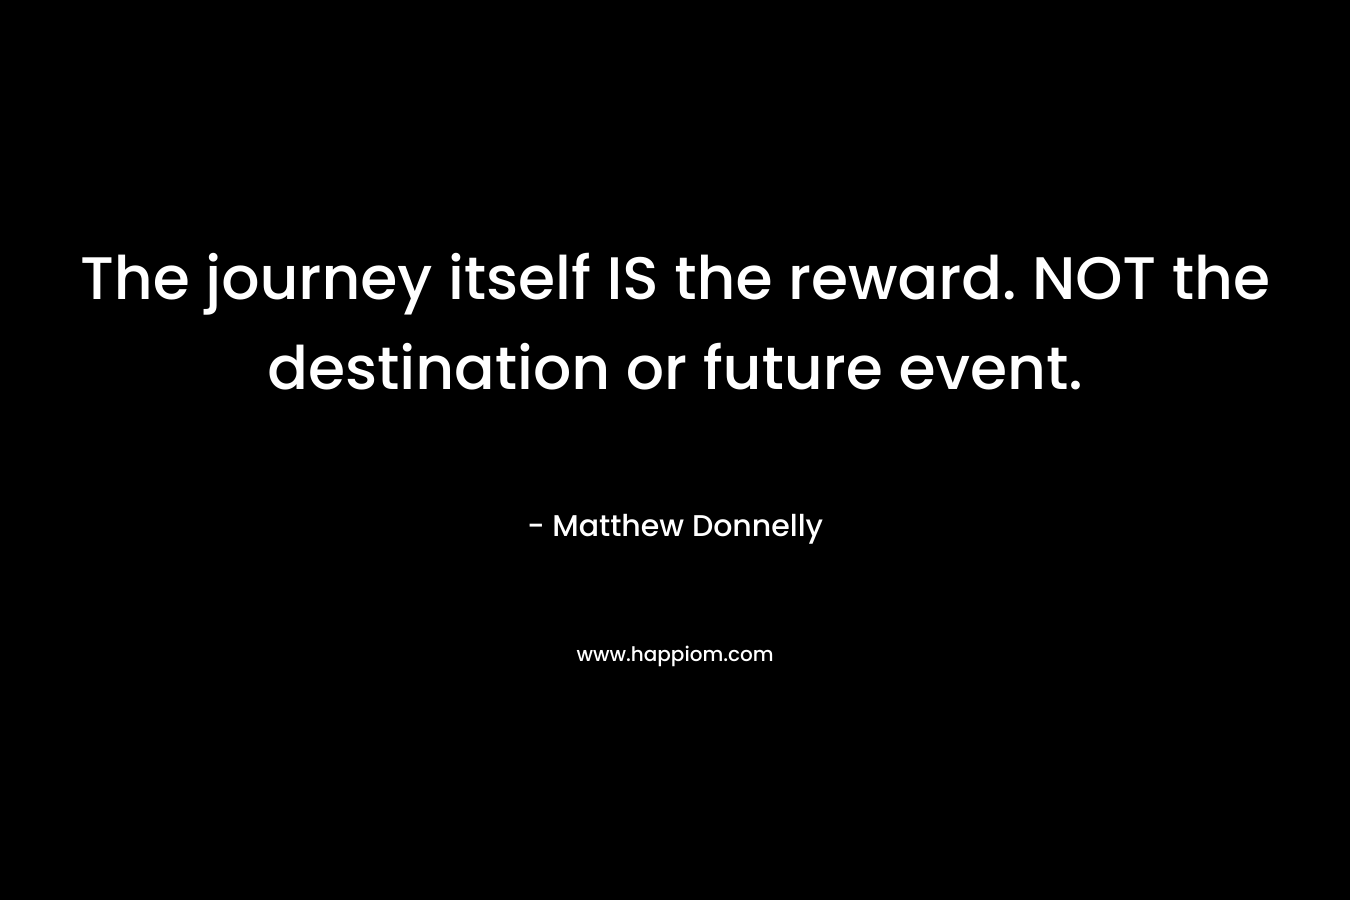 The journey itself IS the reward. NOT the destination or future event.